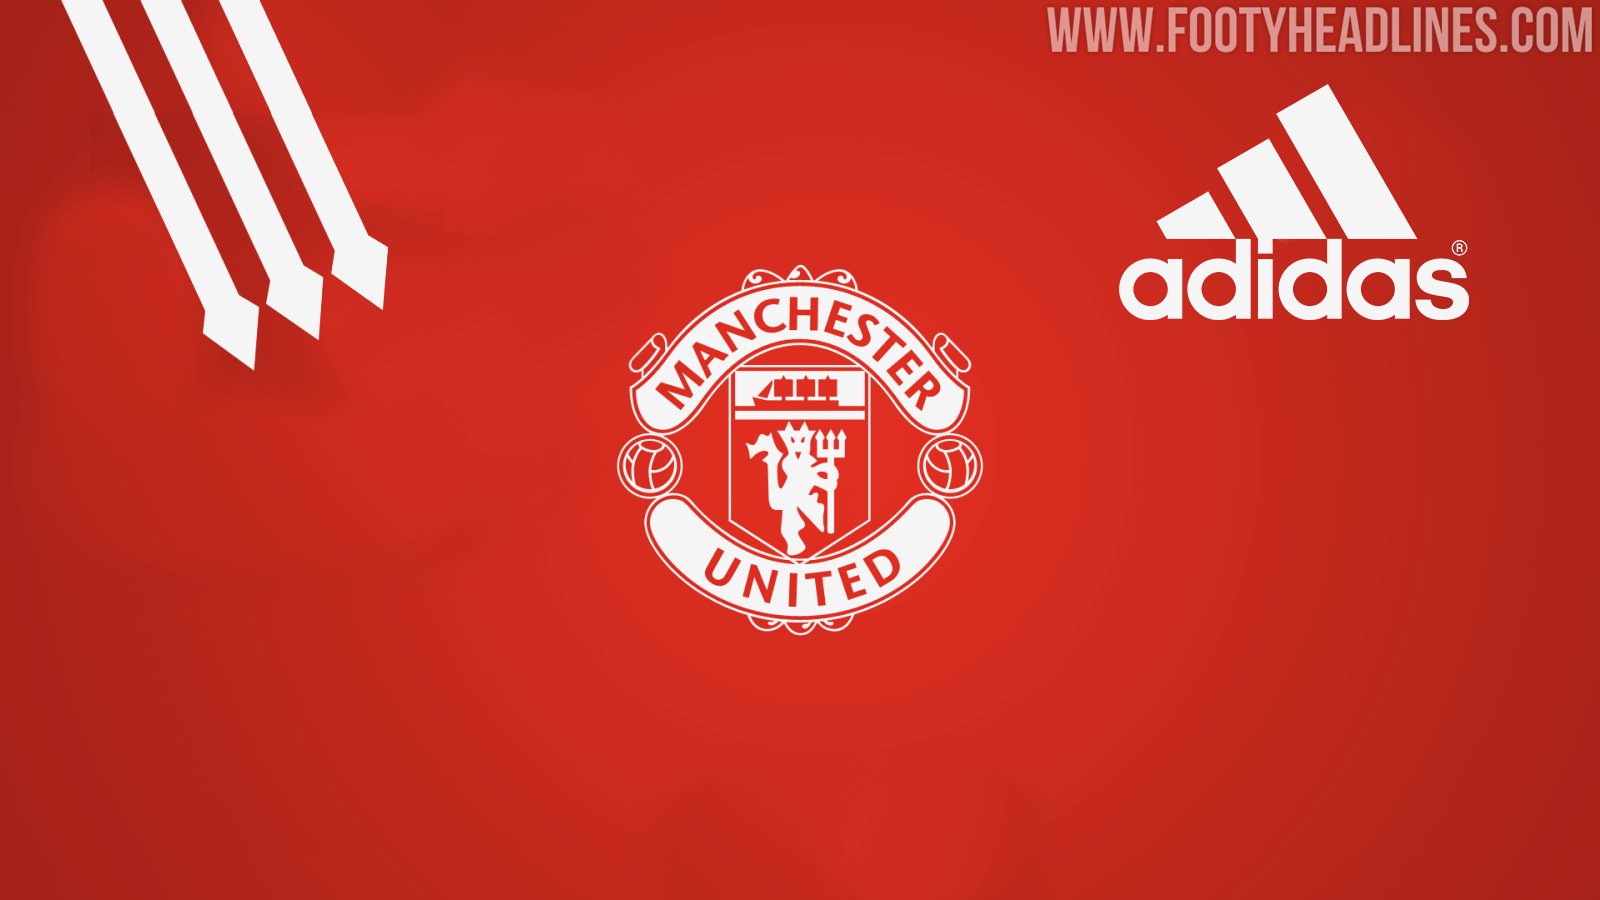 Manchester Adidas Deal Includes Massive Reduction If Club Fails To Reach Champions League Again - Footy Headlines